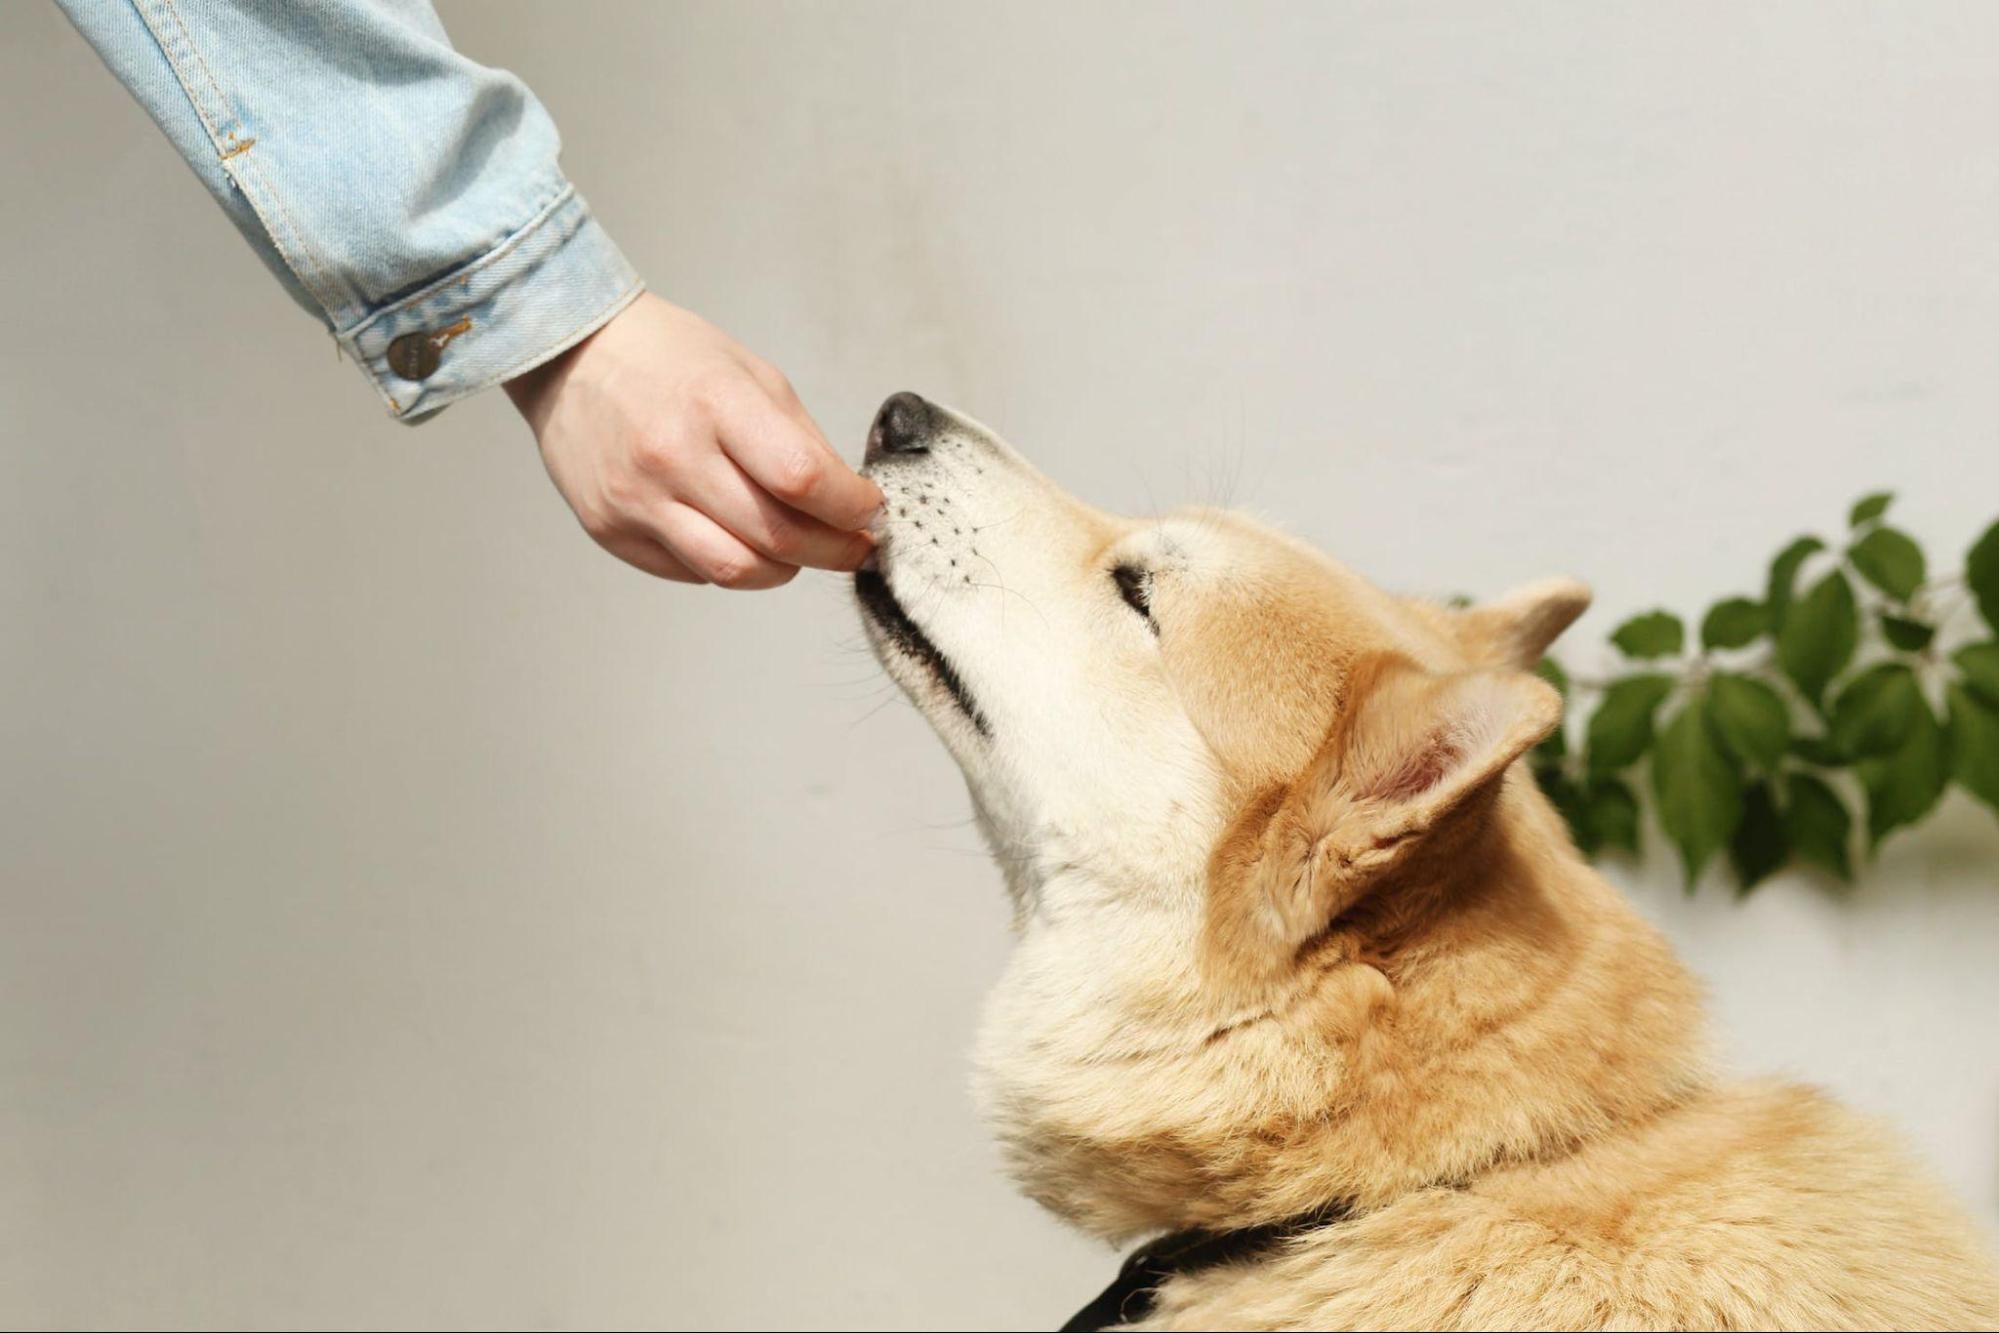 A picture of someone hand-feeding a dog